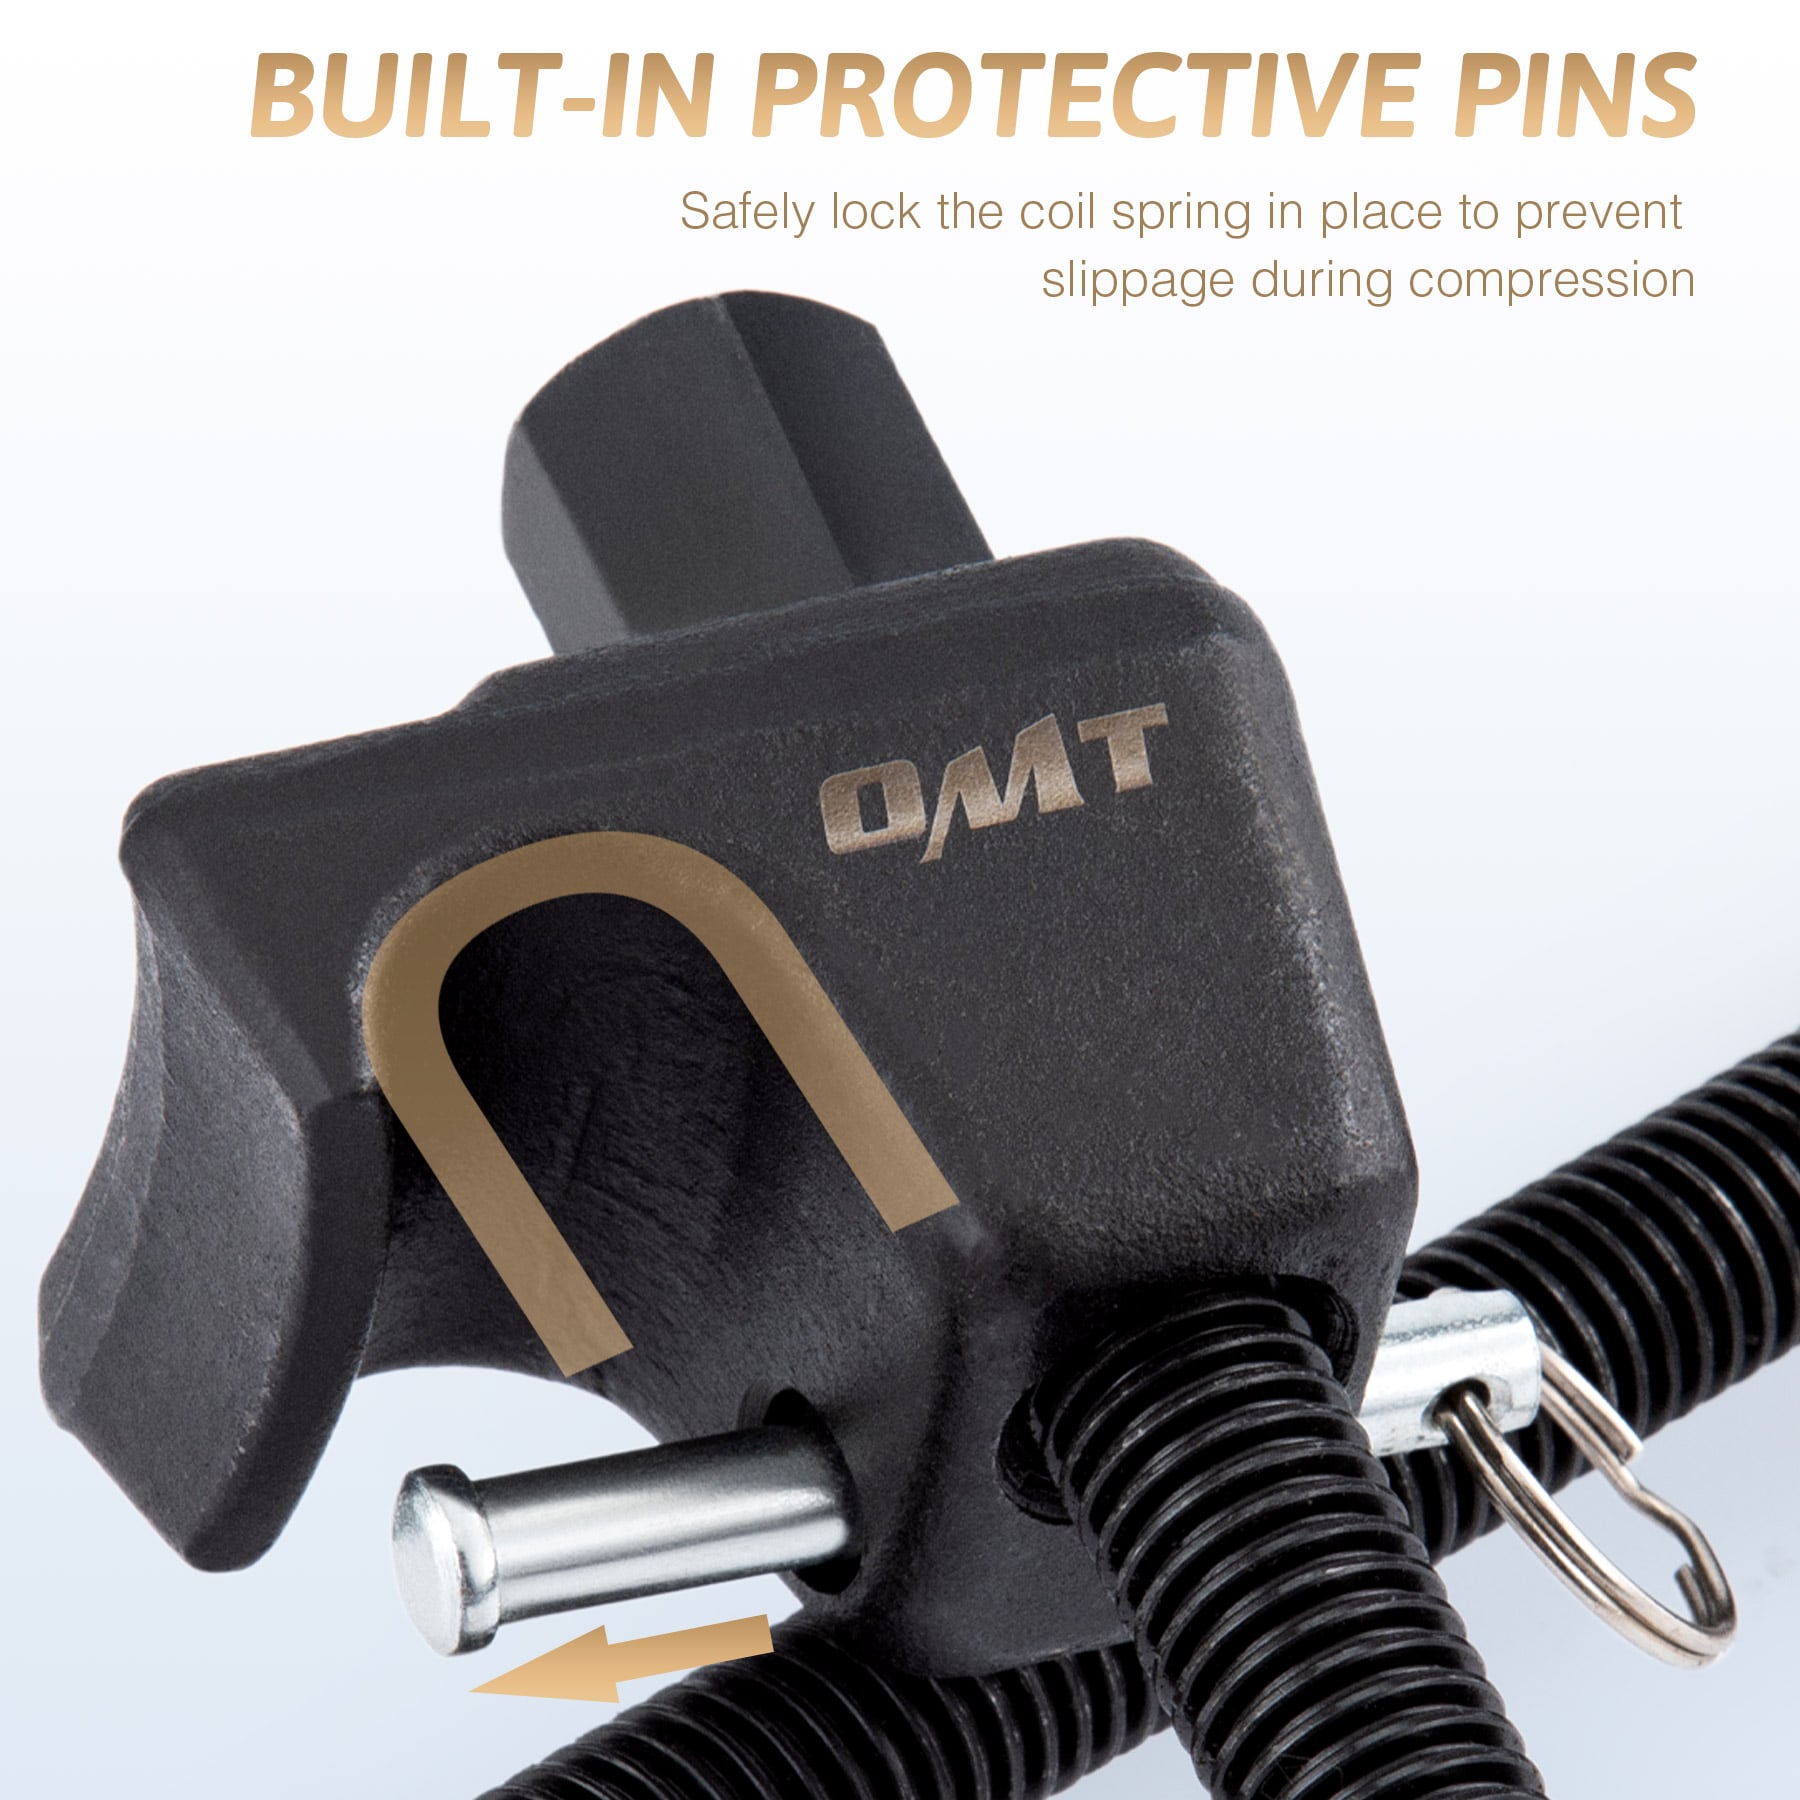 Built In Protective Pins Safely Lock The Coil Spring